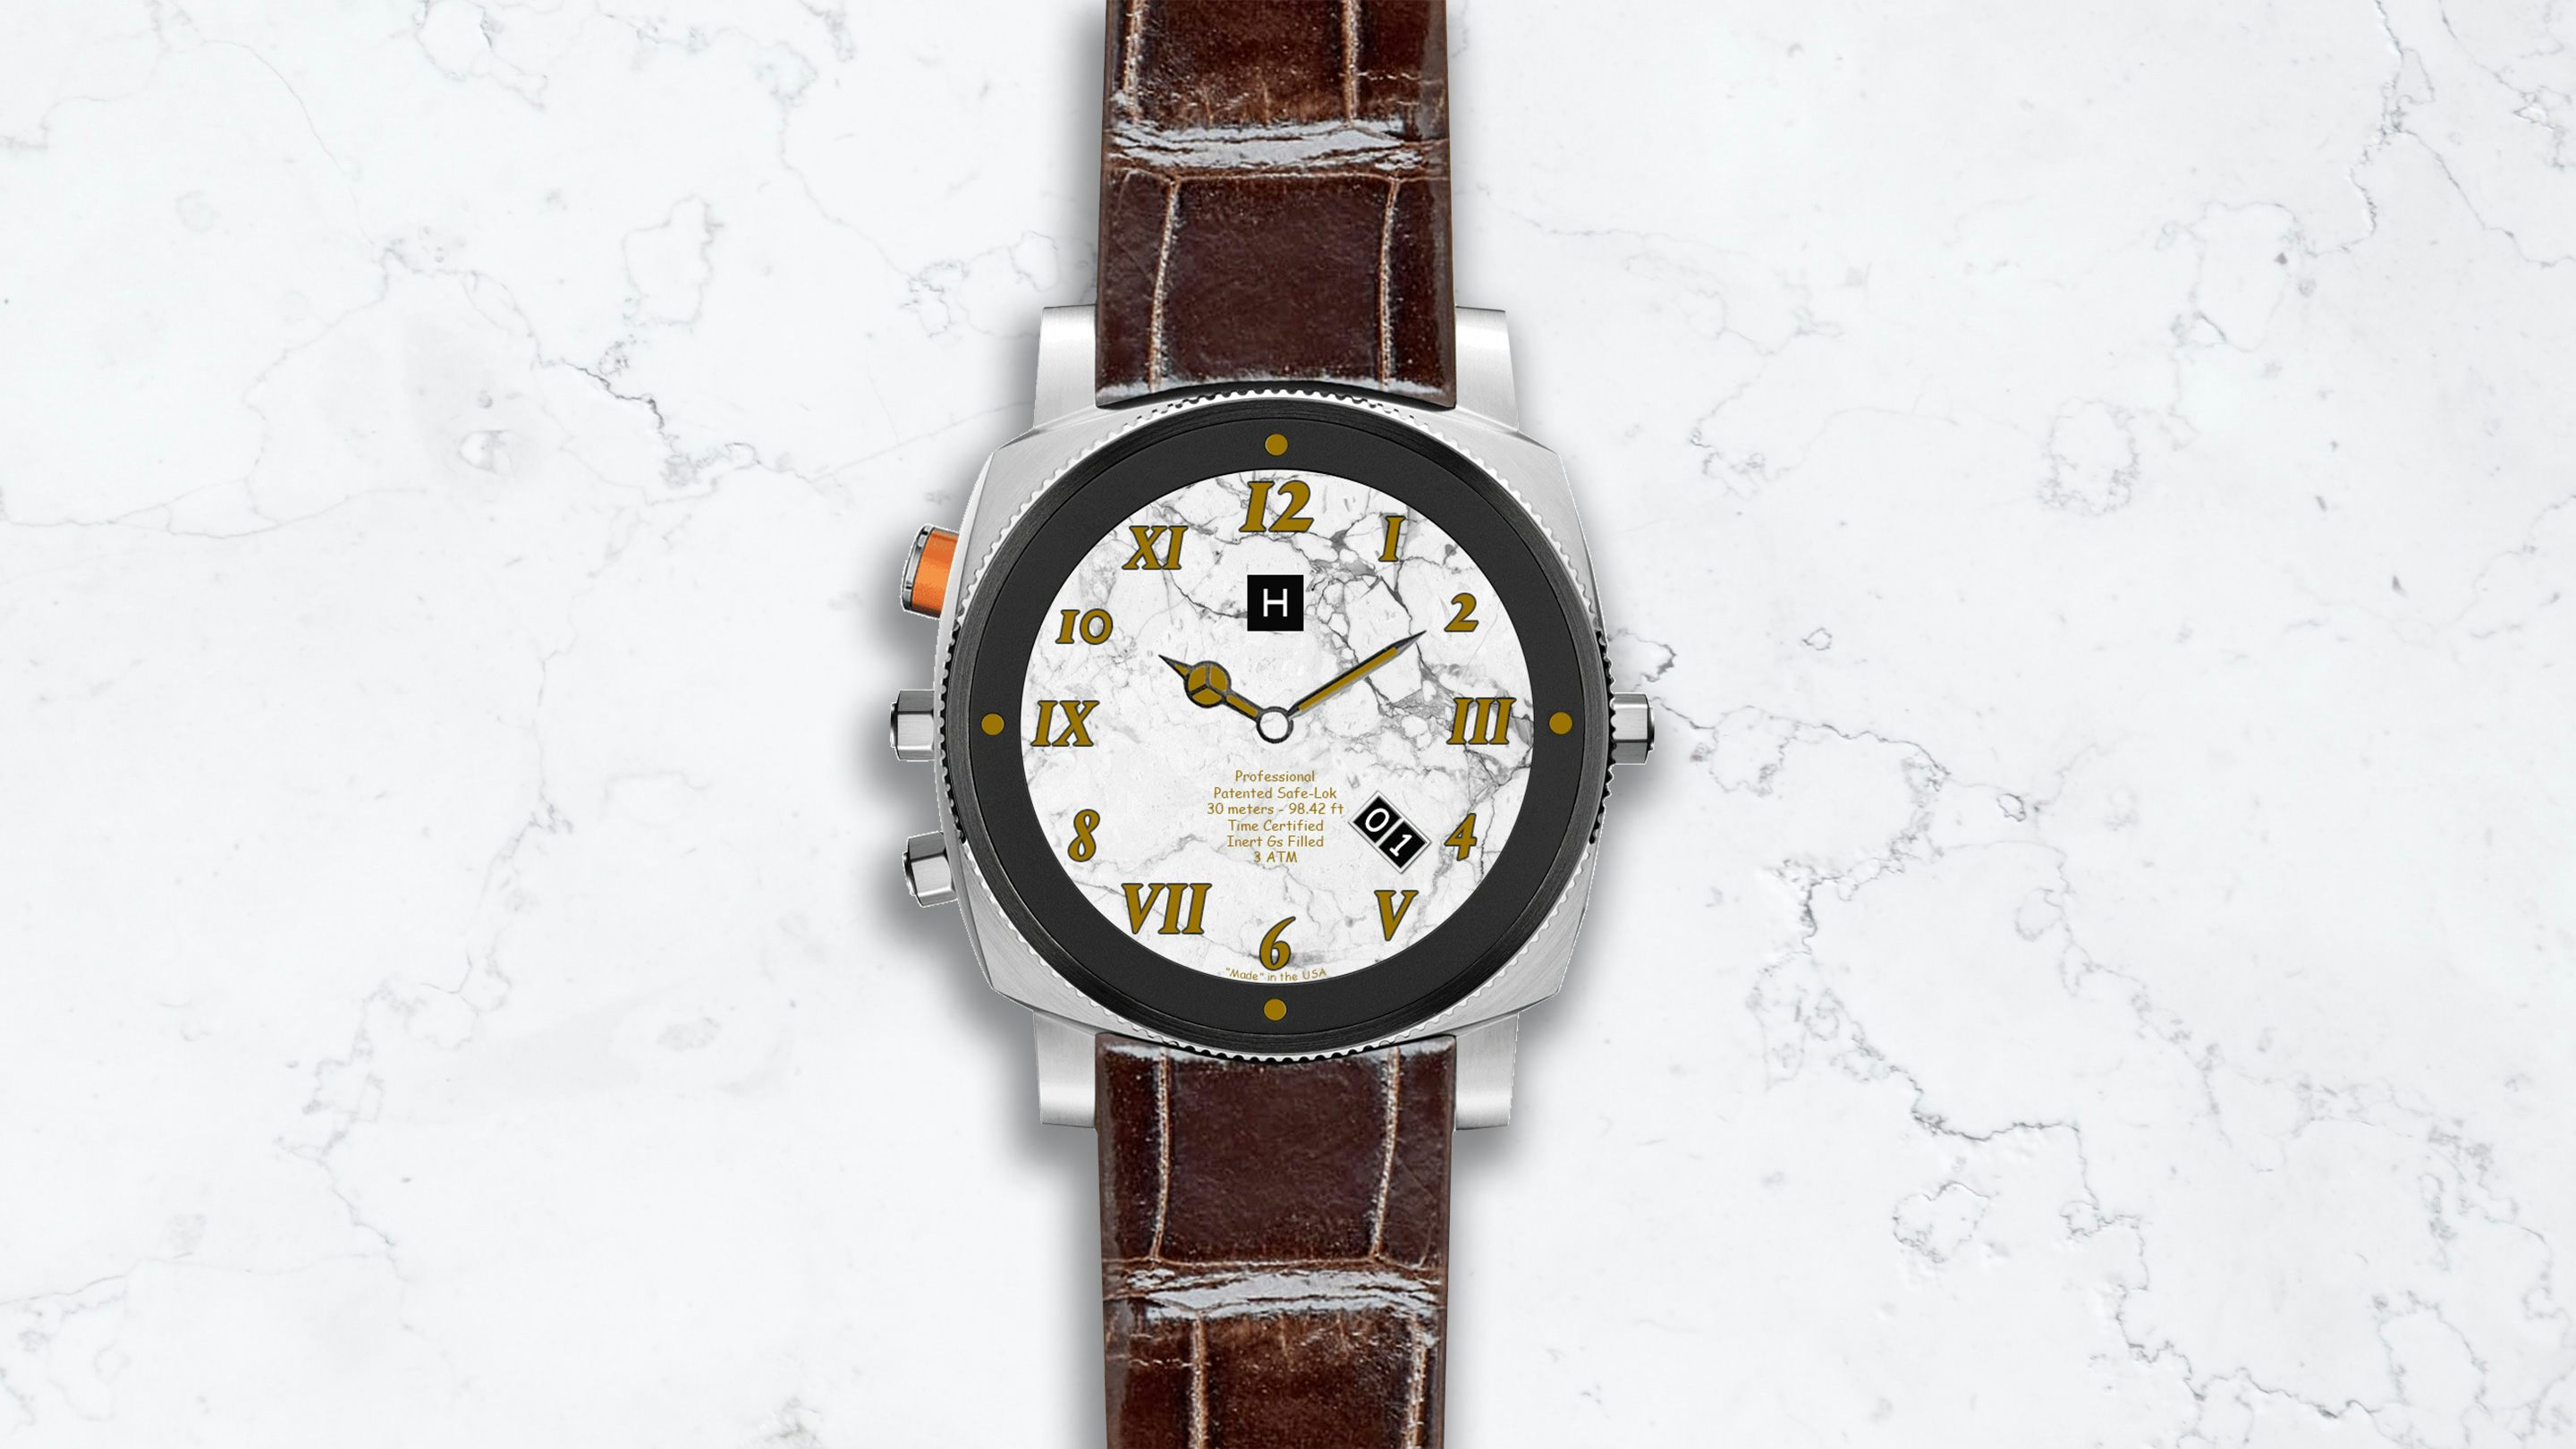 Introducing: Our Very First HODINKEE-Branded Watch - Hodinkee